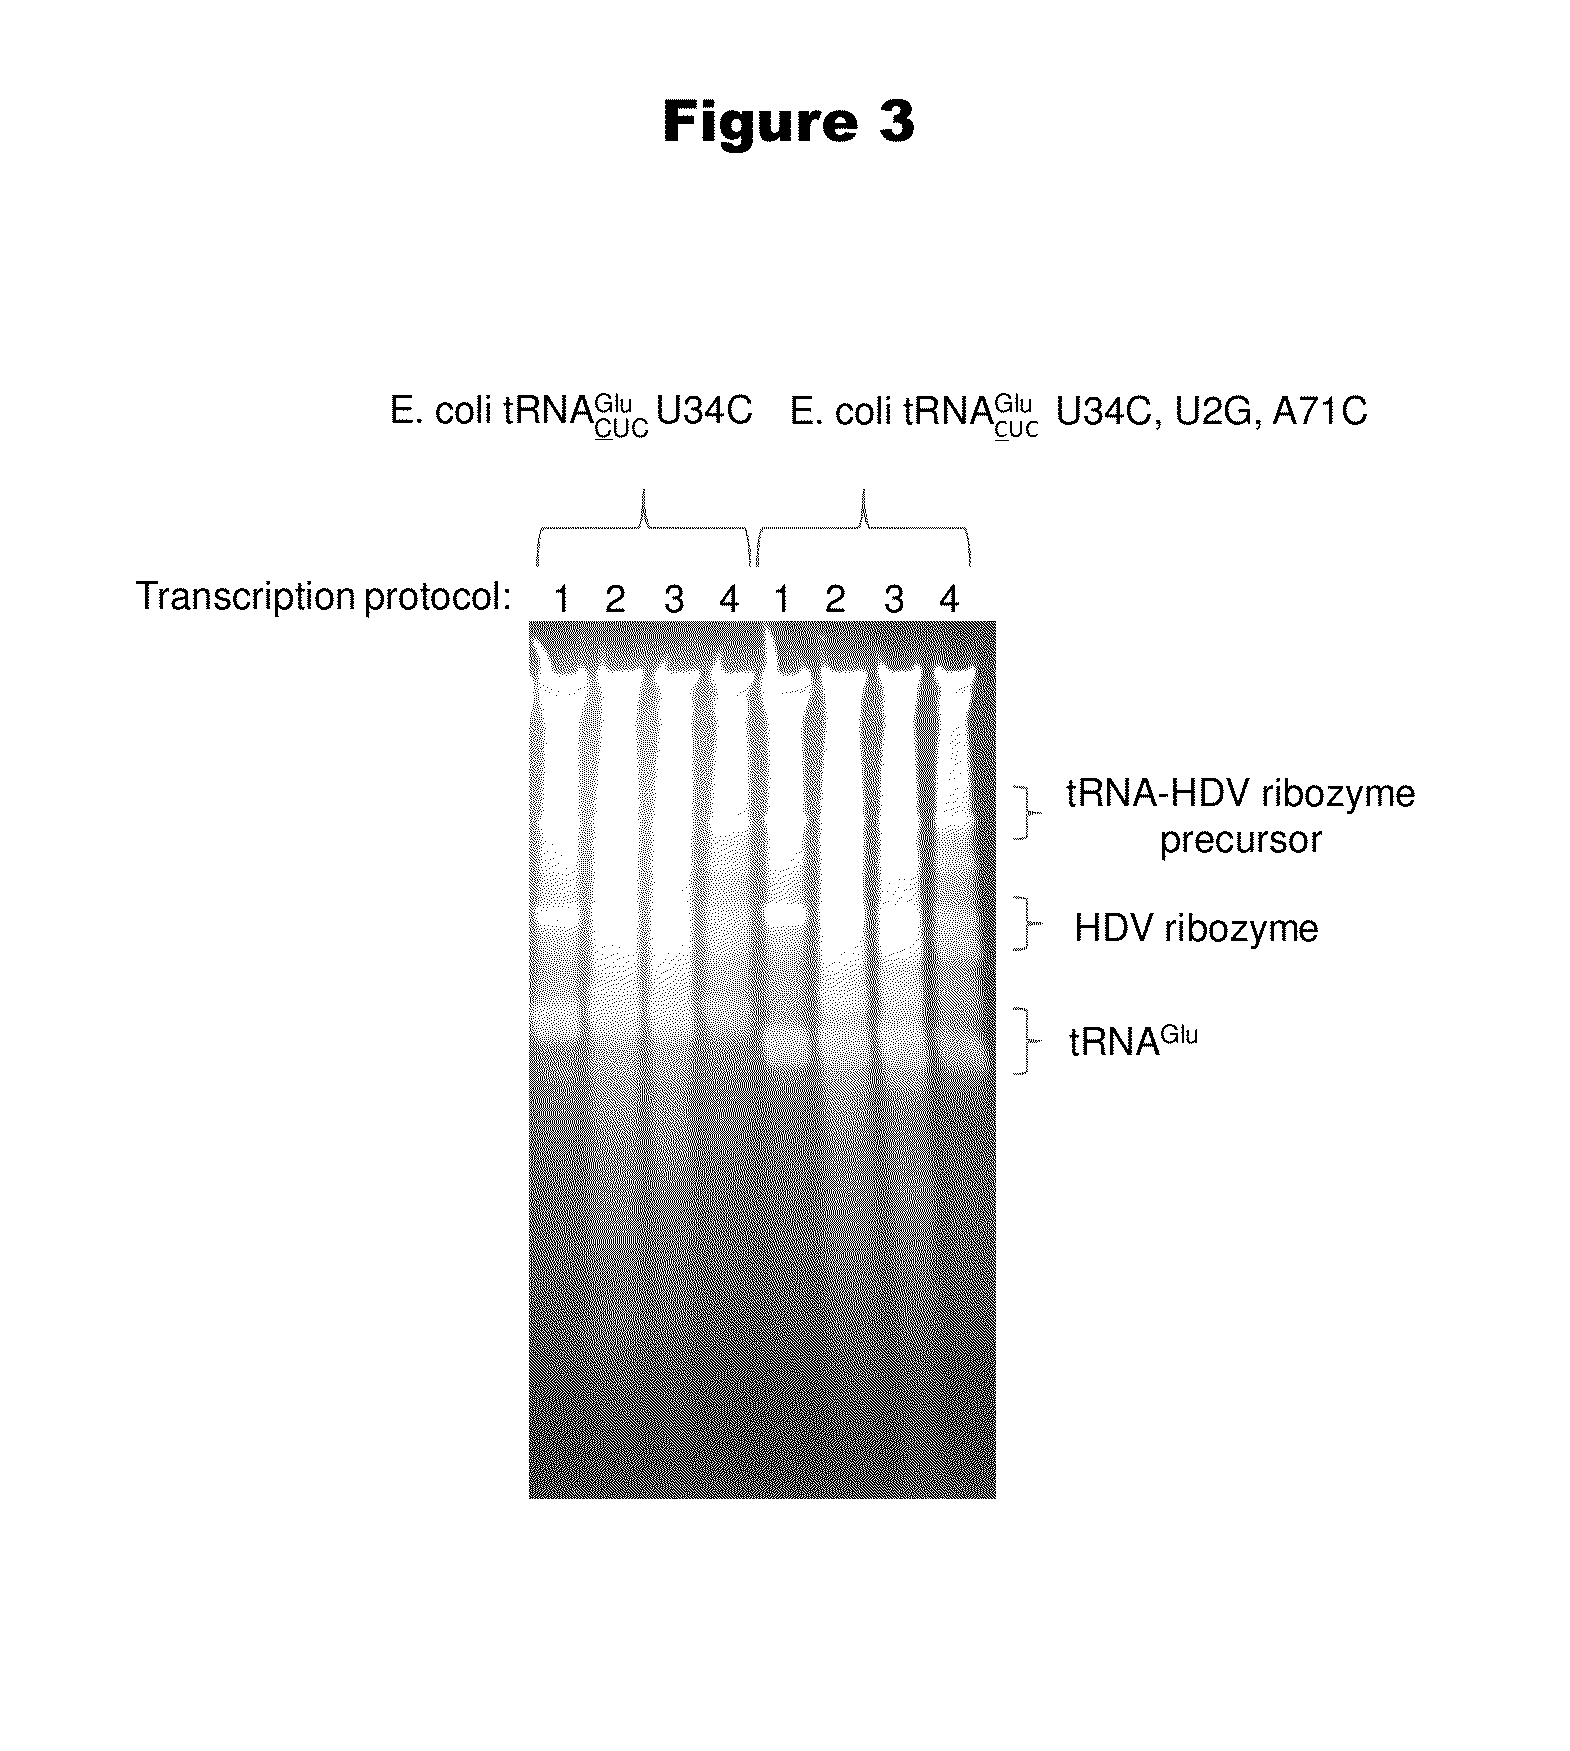 Mono charging system for selectively introducing non-native amino acids into proteins using an in vitro protein synthesis system